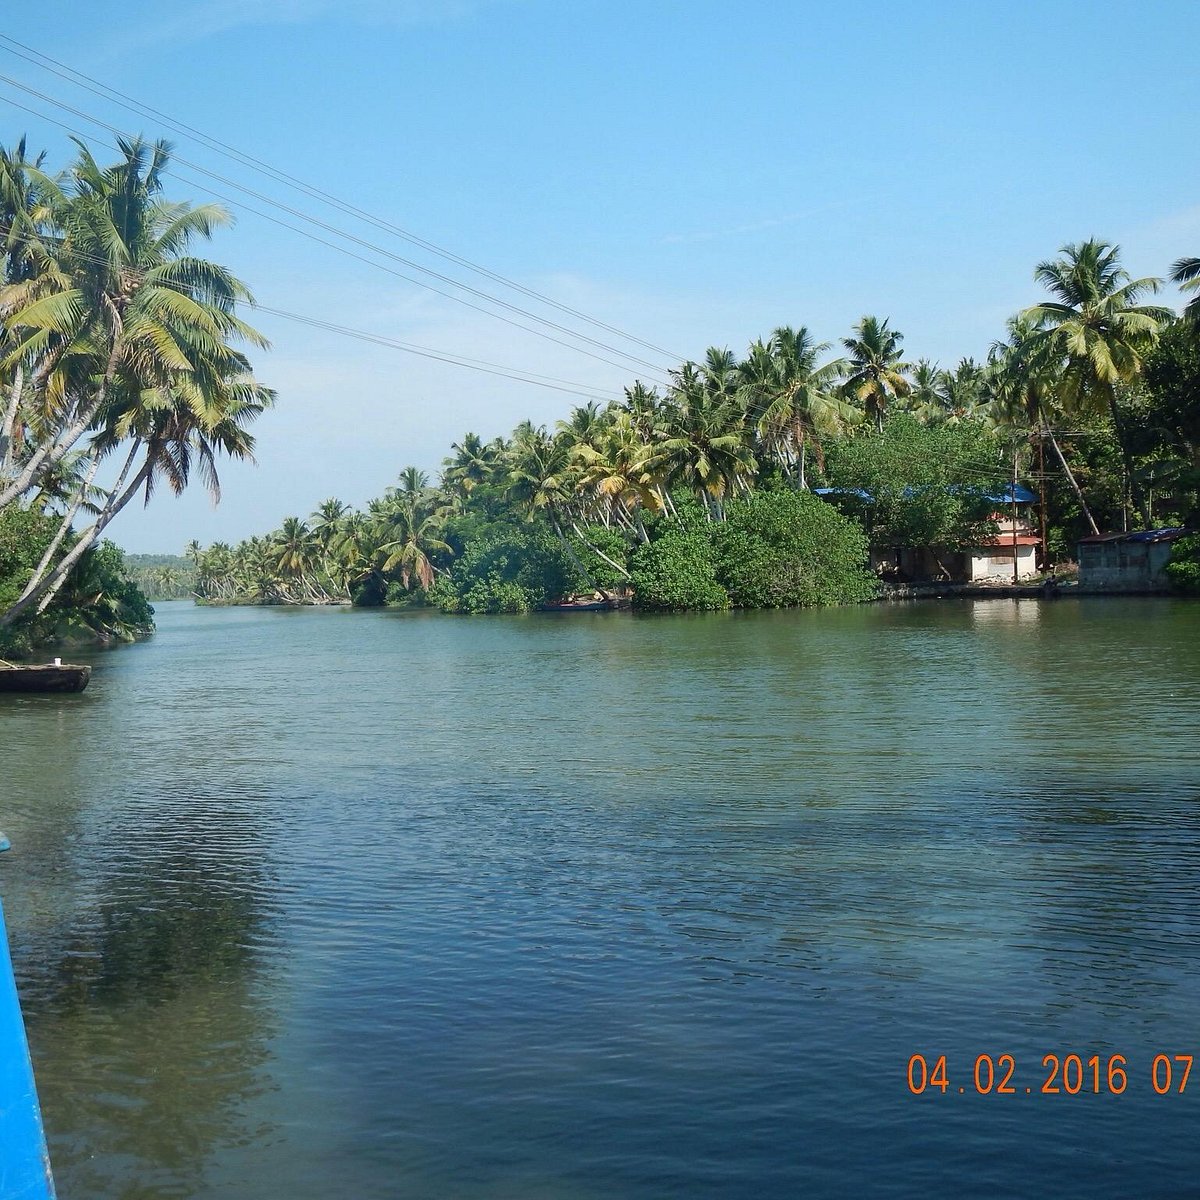 On a country boat to Golden Island! - Review of Ponnumthuruthu Island,  Varkala Town, India - Tripadvisor